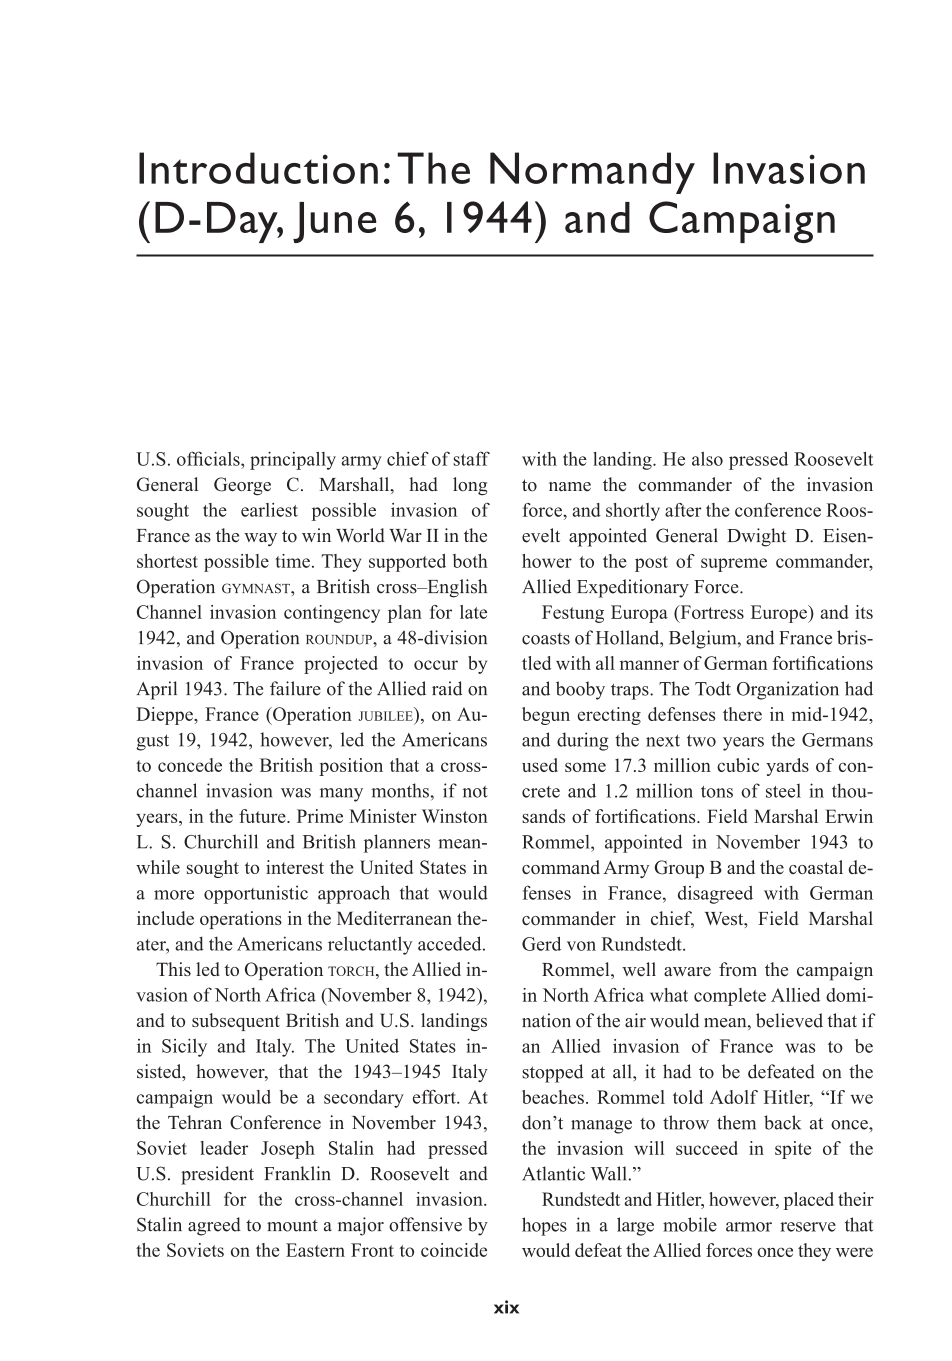 D-Day: The Essential Reference Guide page xix